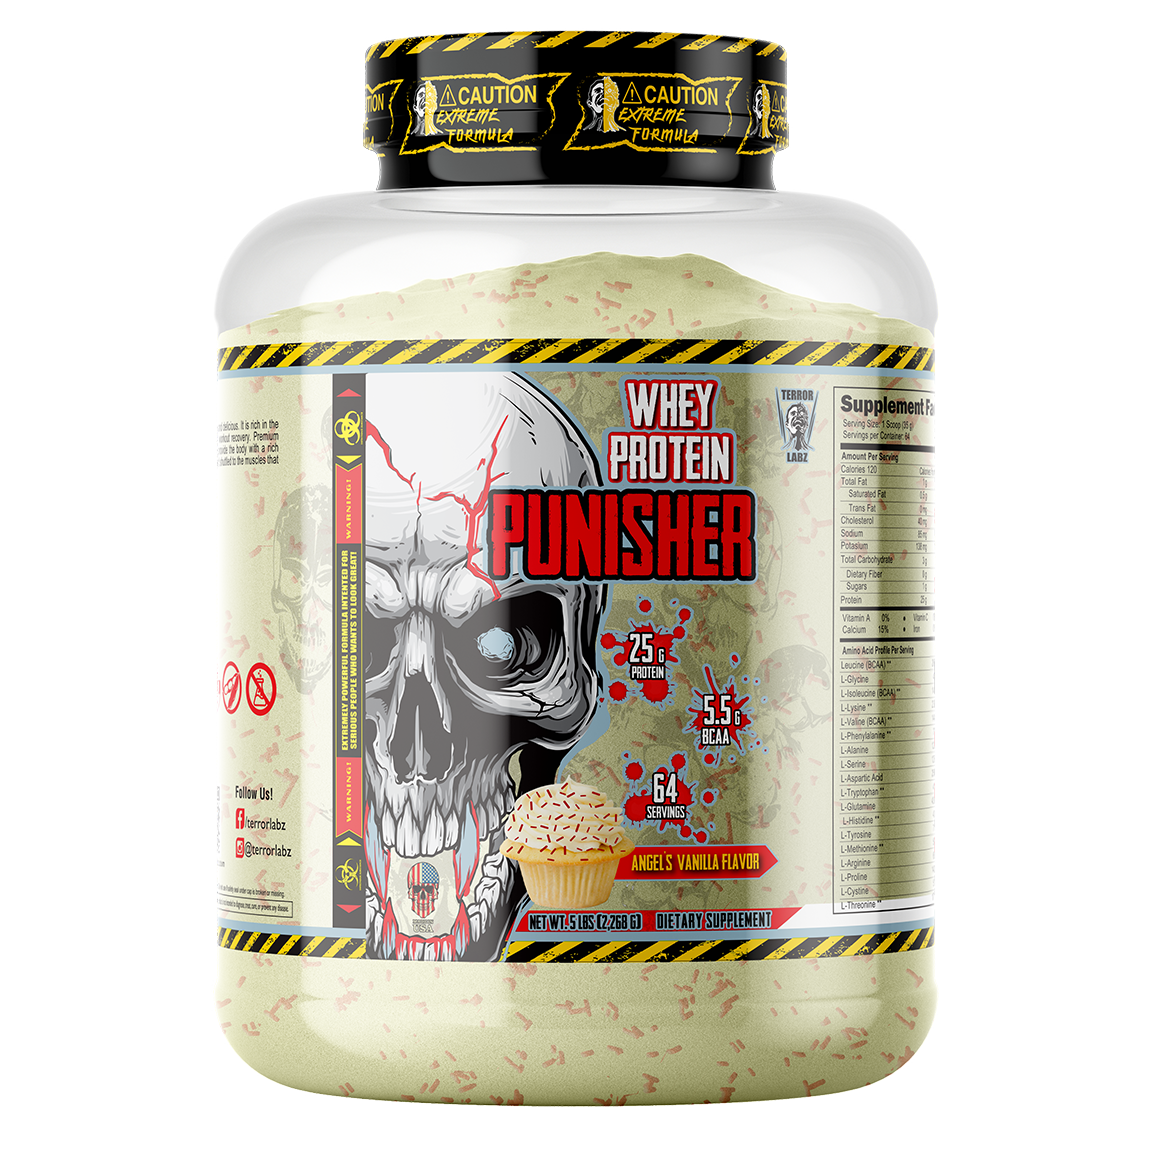 PUNISHER, Whey Protein, 25g Protein, 5.5g BCAA, 64 Servings